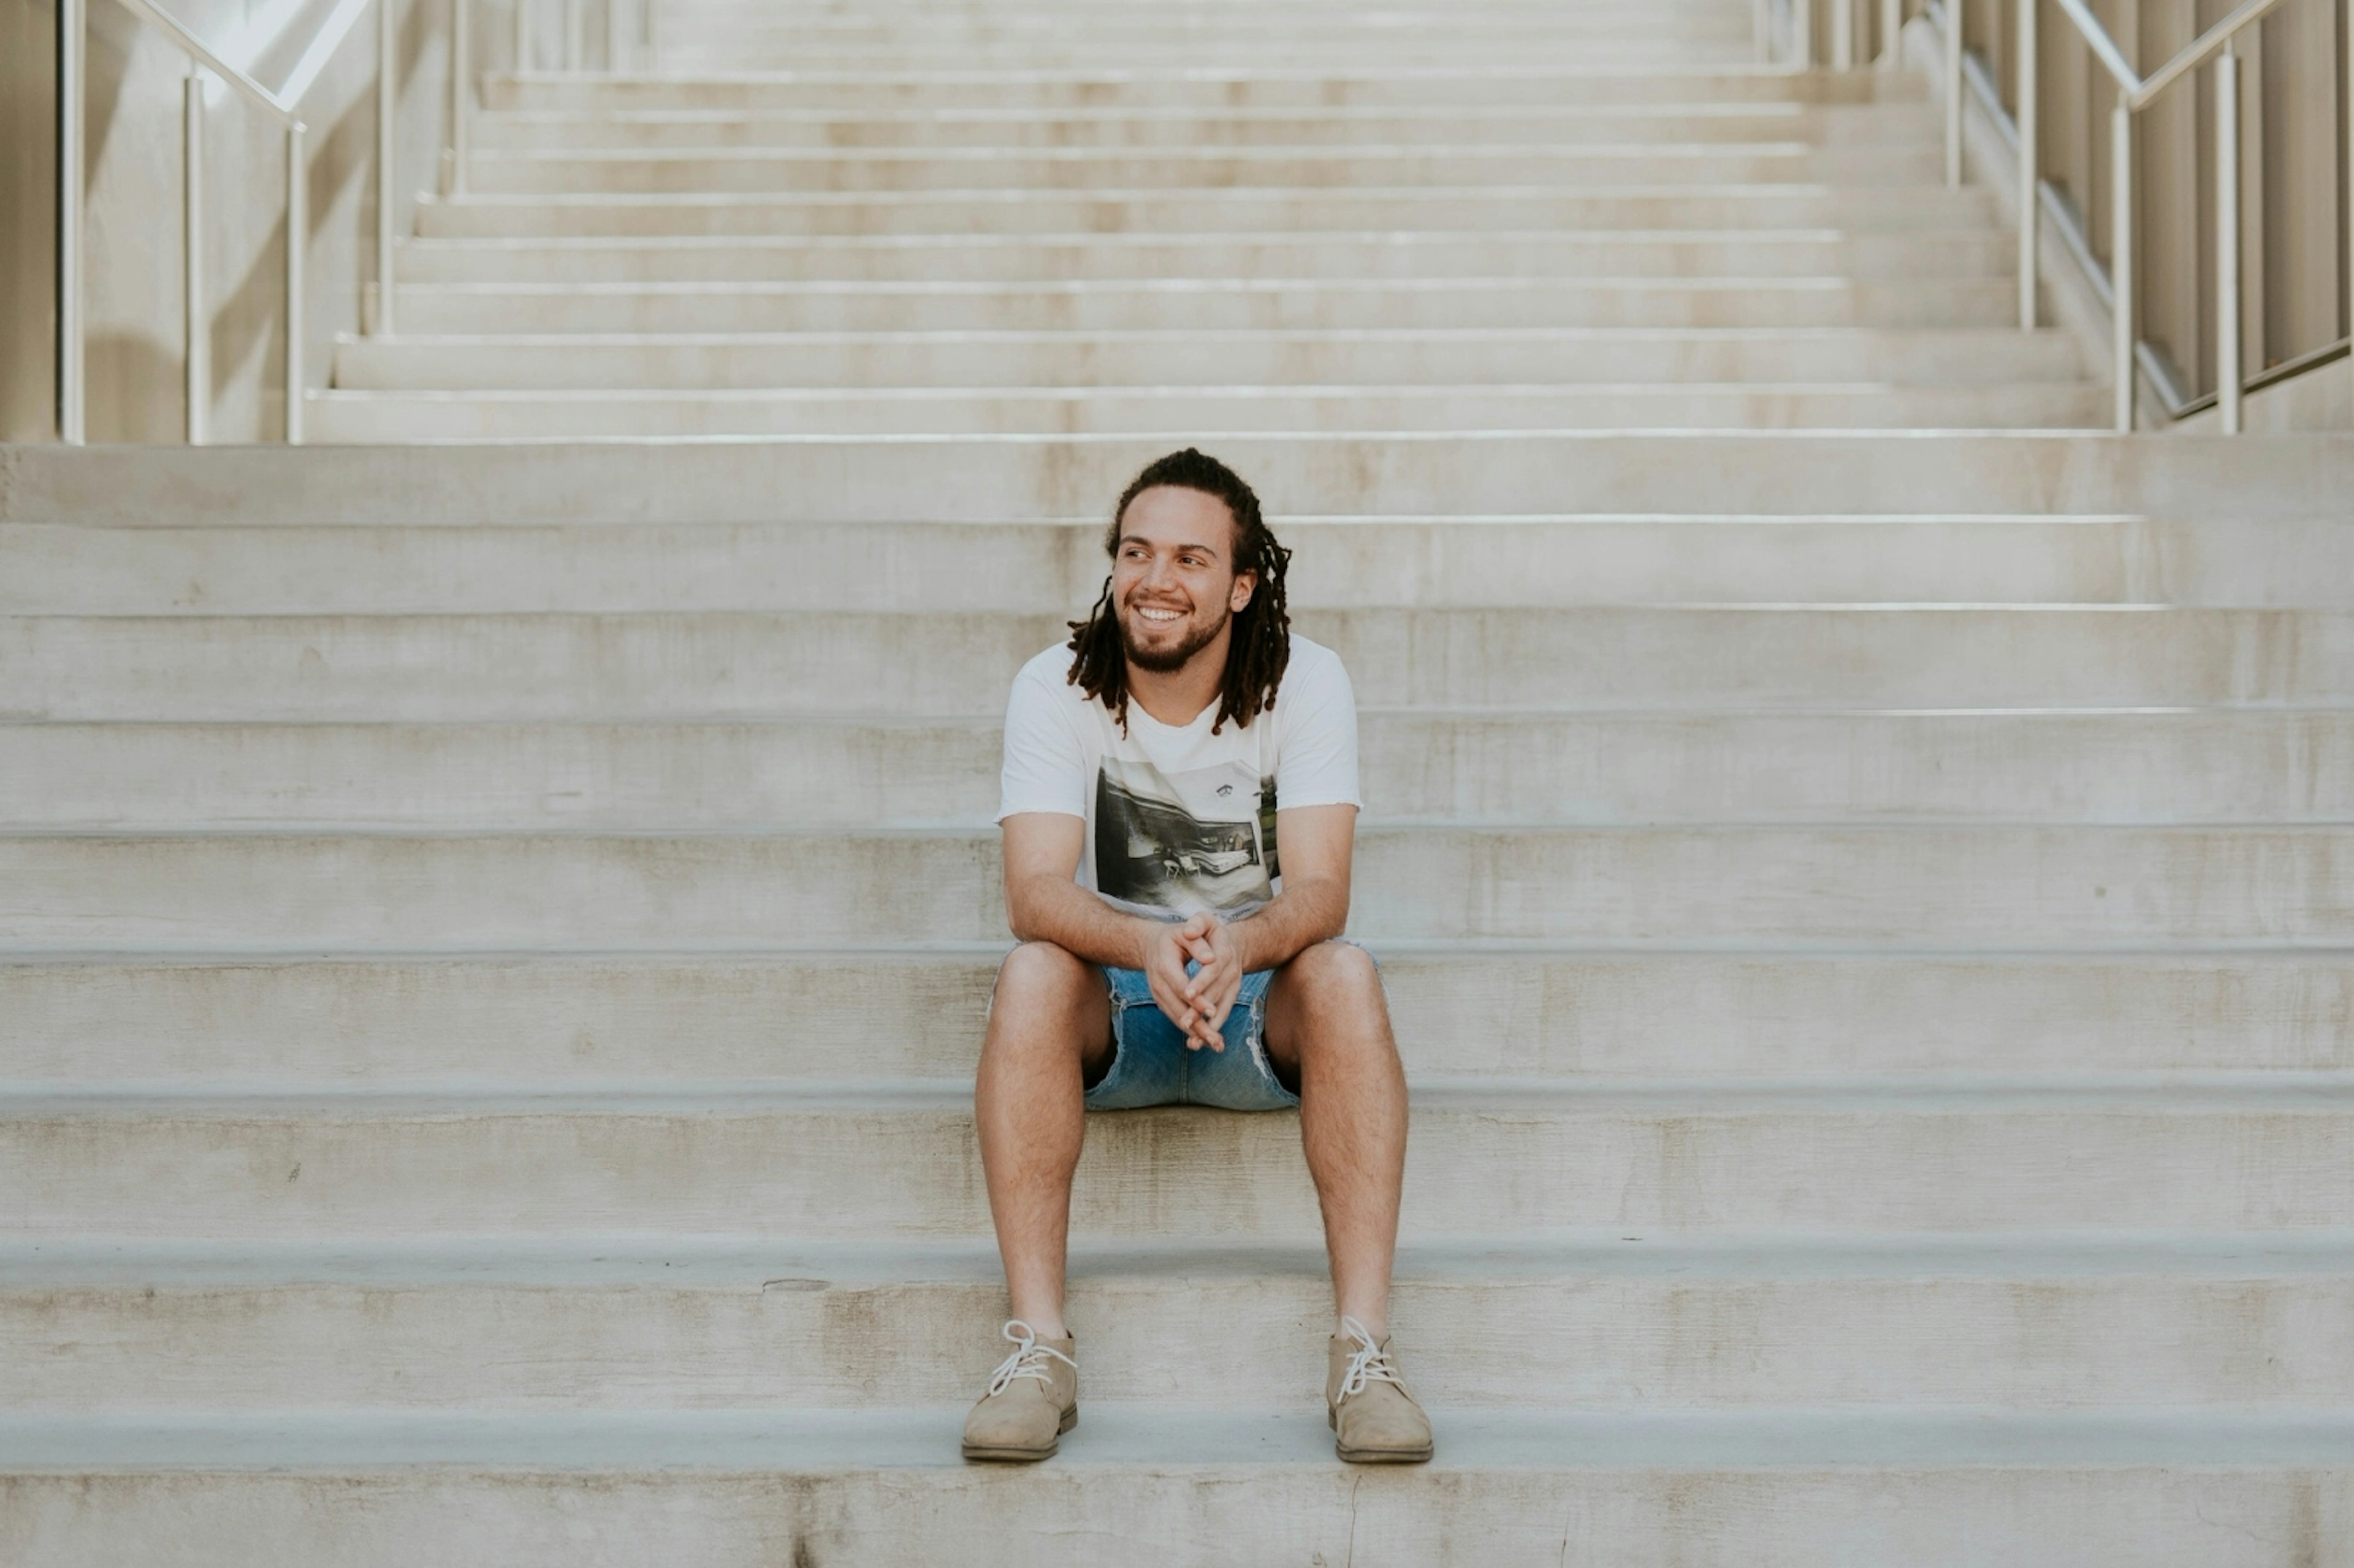 A smiling man with dreadlocks sits on a staircase